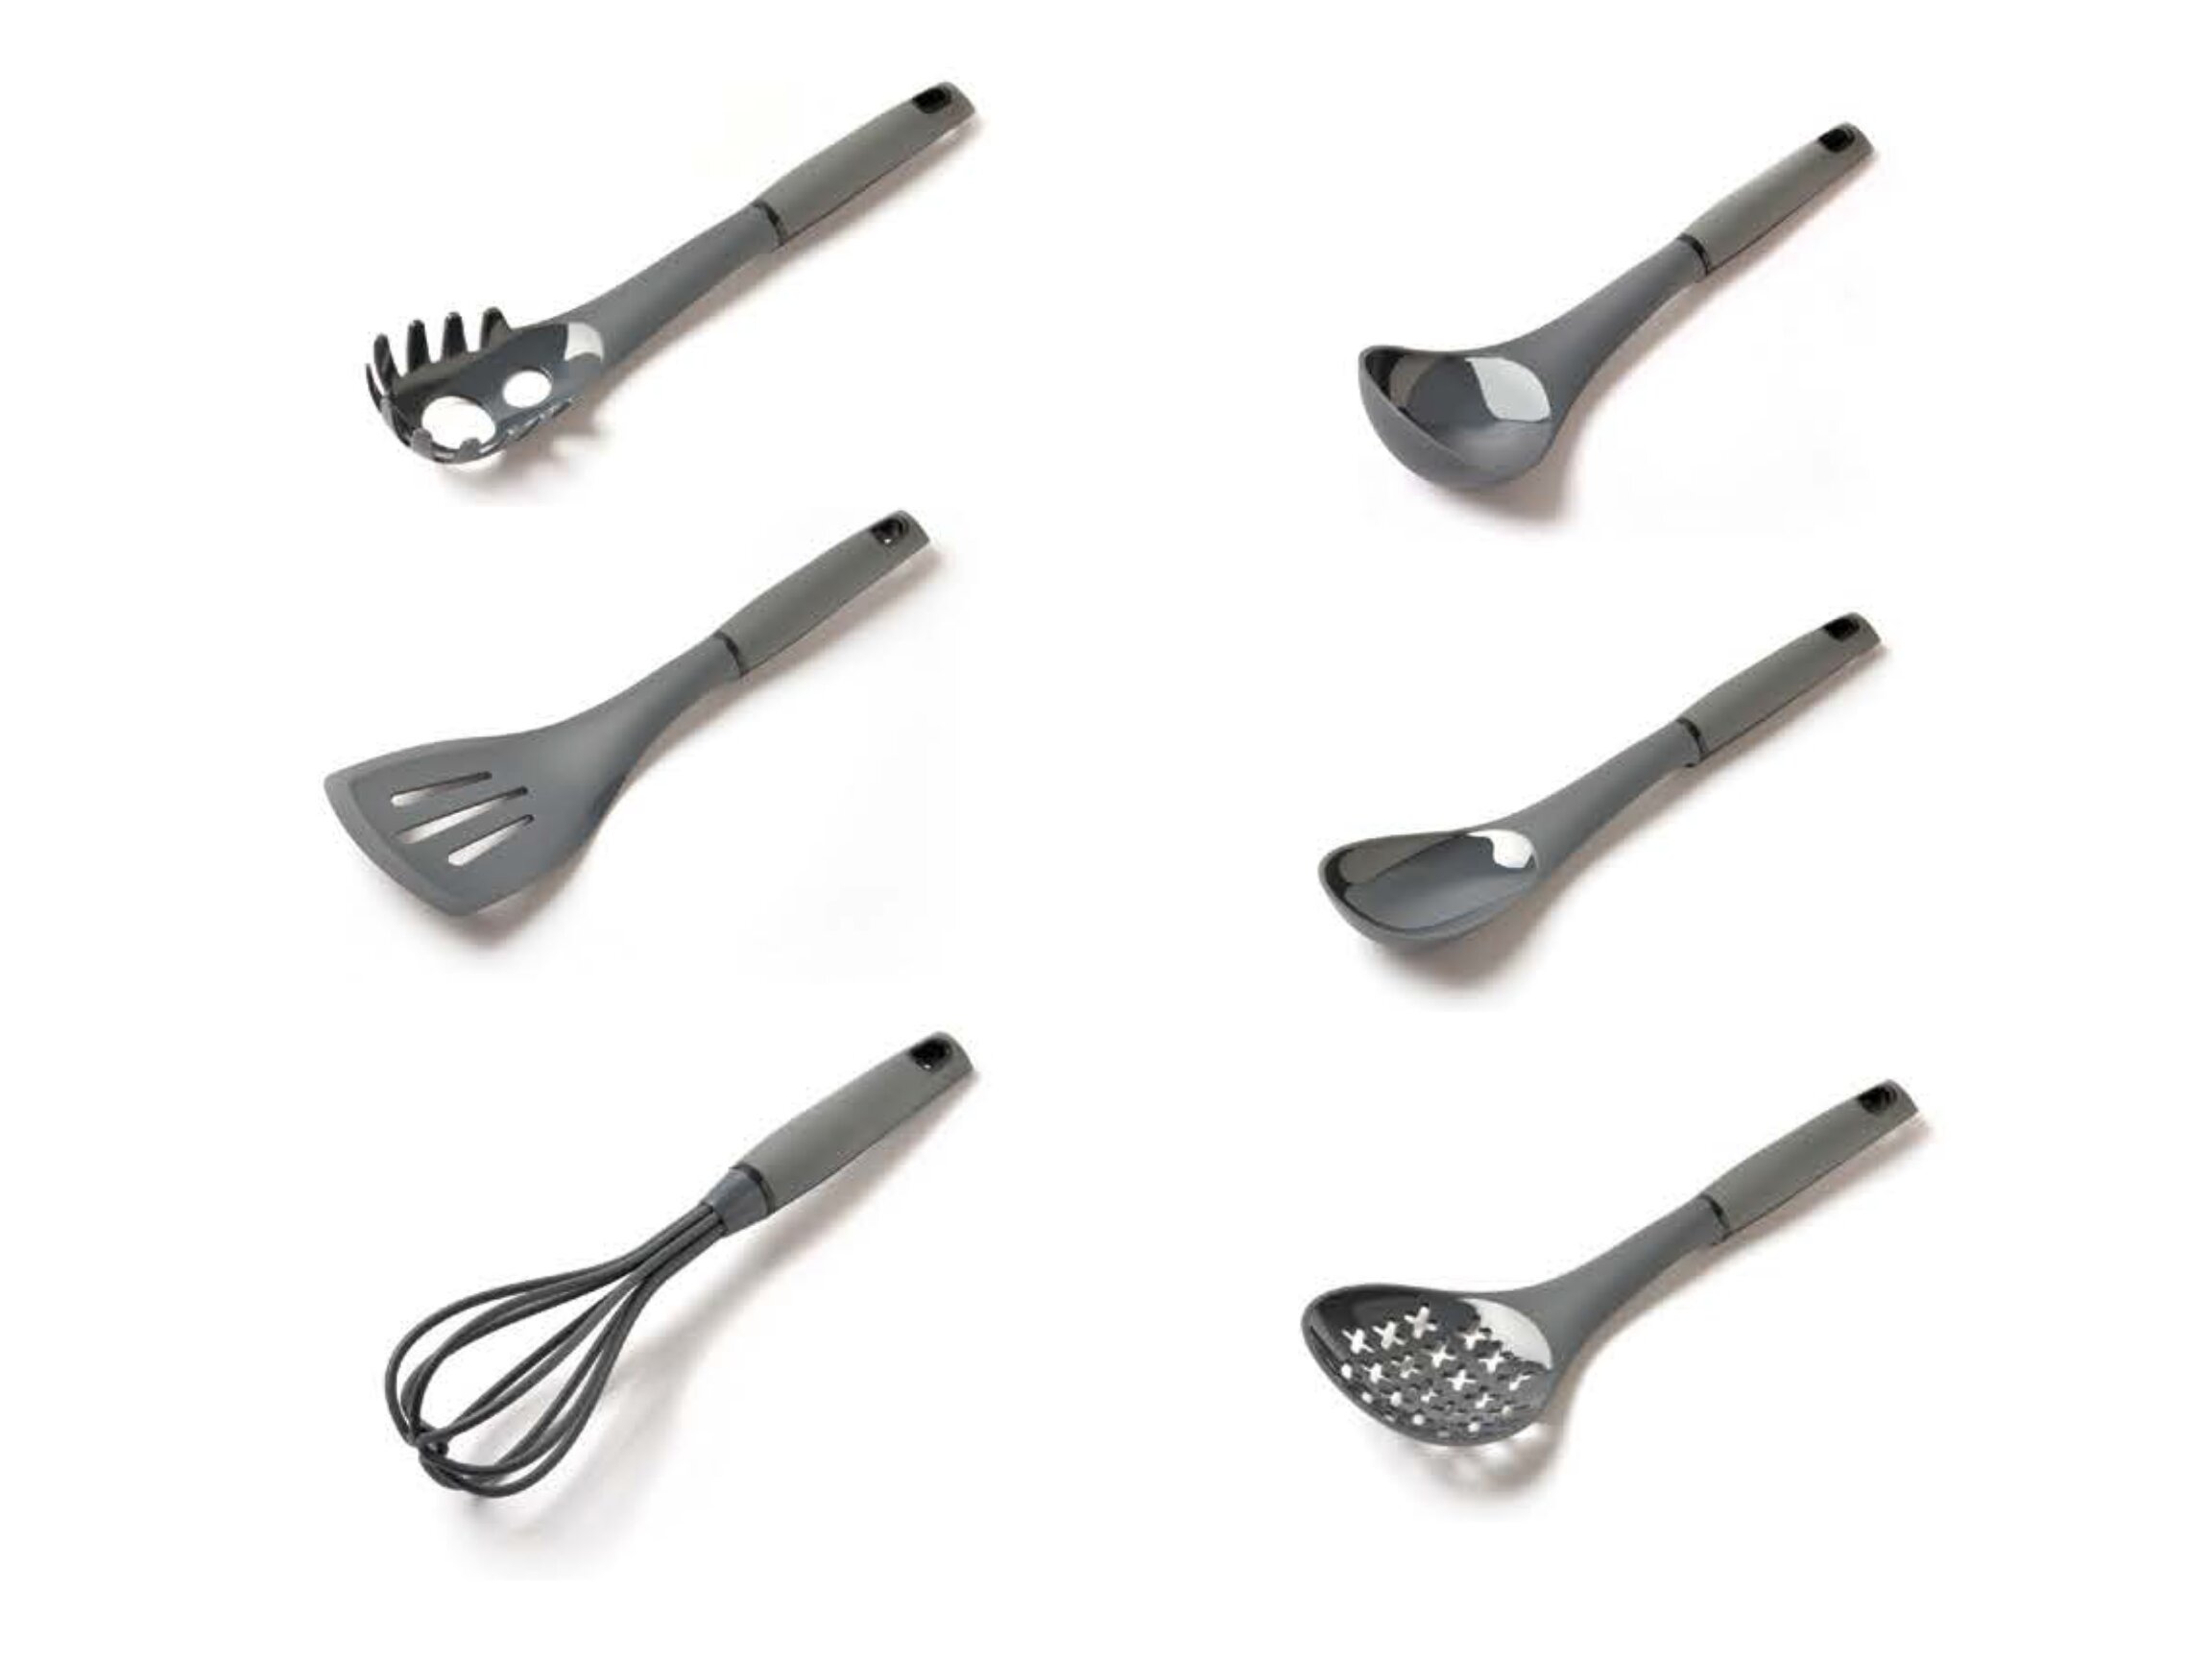 Ayesha Curry Tools & Gadgets Stainless Steel Fish Turner Utensil Set Stainless Steel - 2 Piece